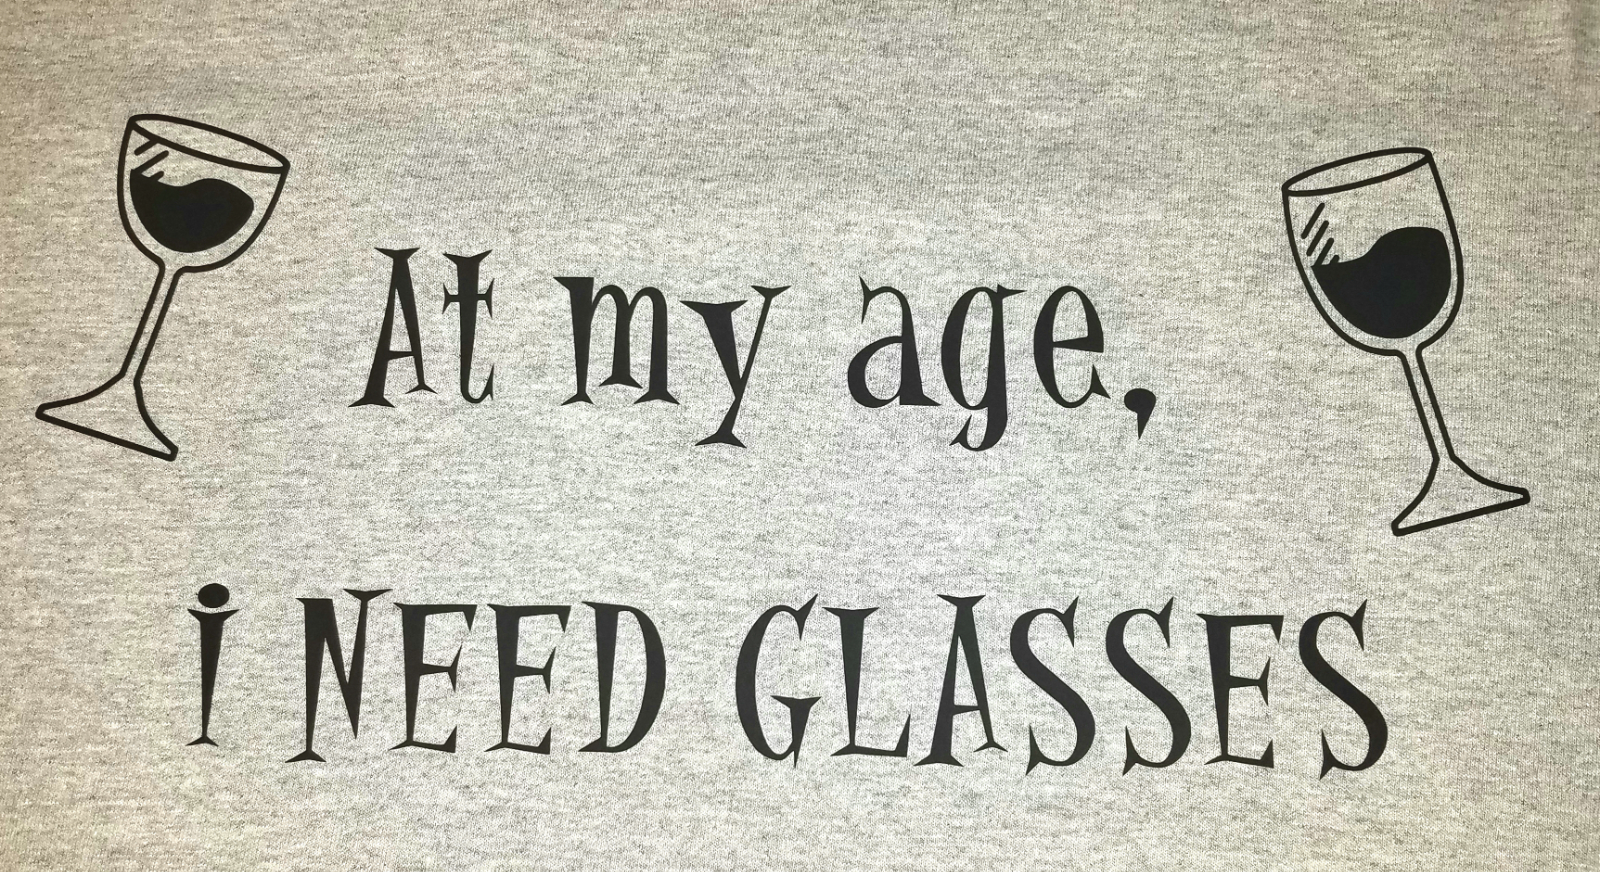 at-my-age-i-need-glasses-two-sided-gray-tshirt